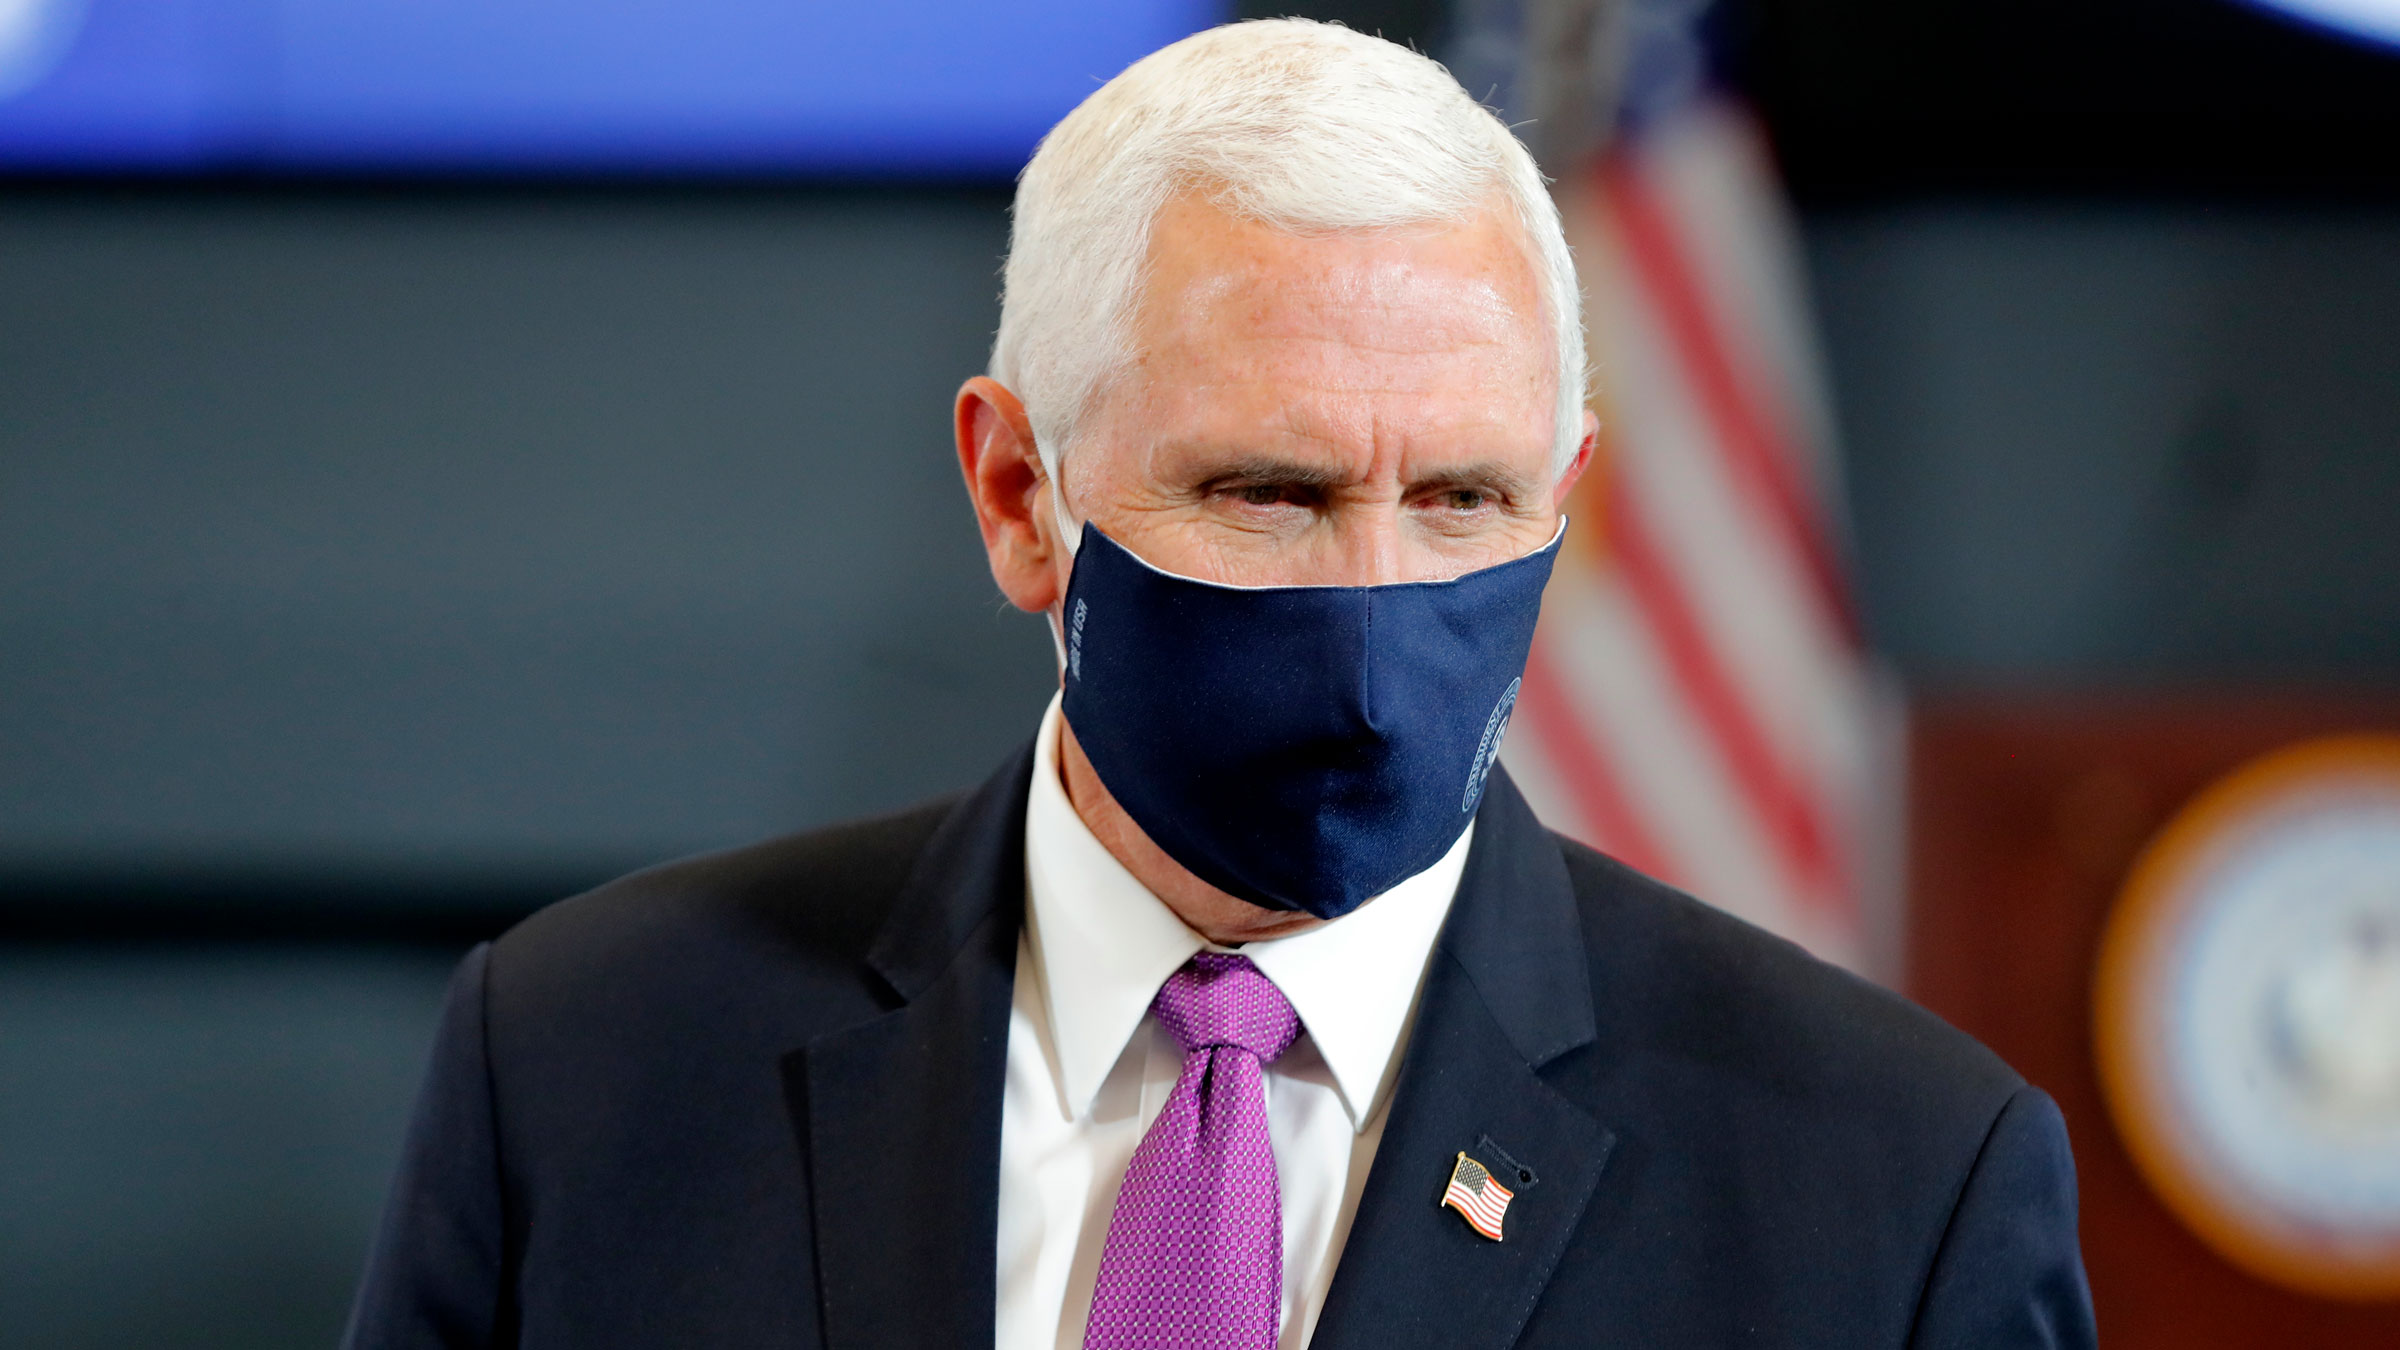 Vice President Mike Pence wears a mask Tuesday as he visits the state Emergency Operations Center in Baton Rouge, Louisiana.